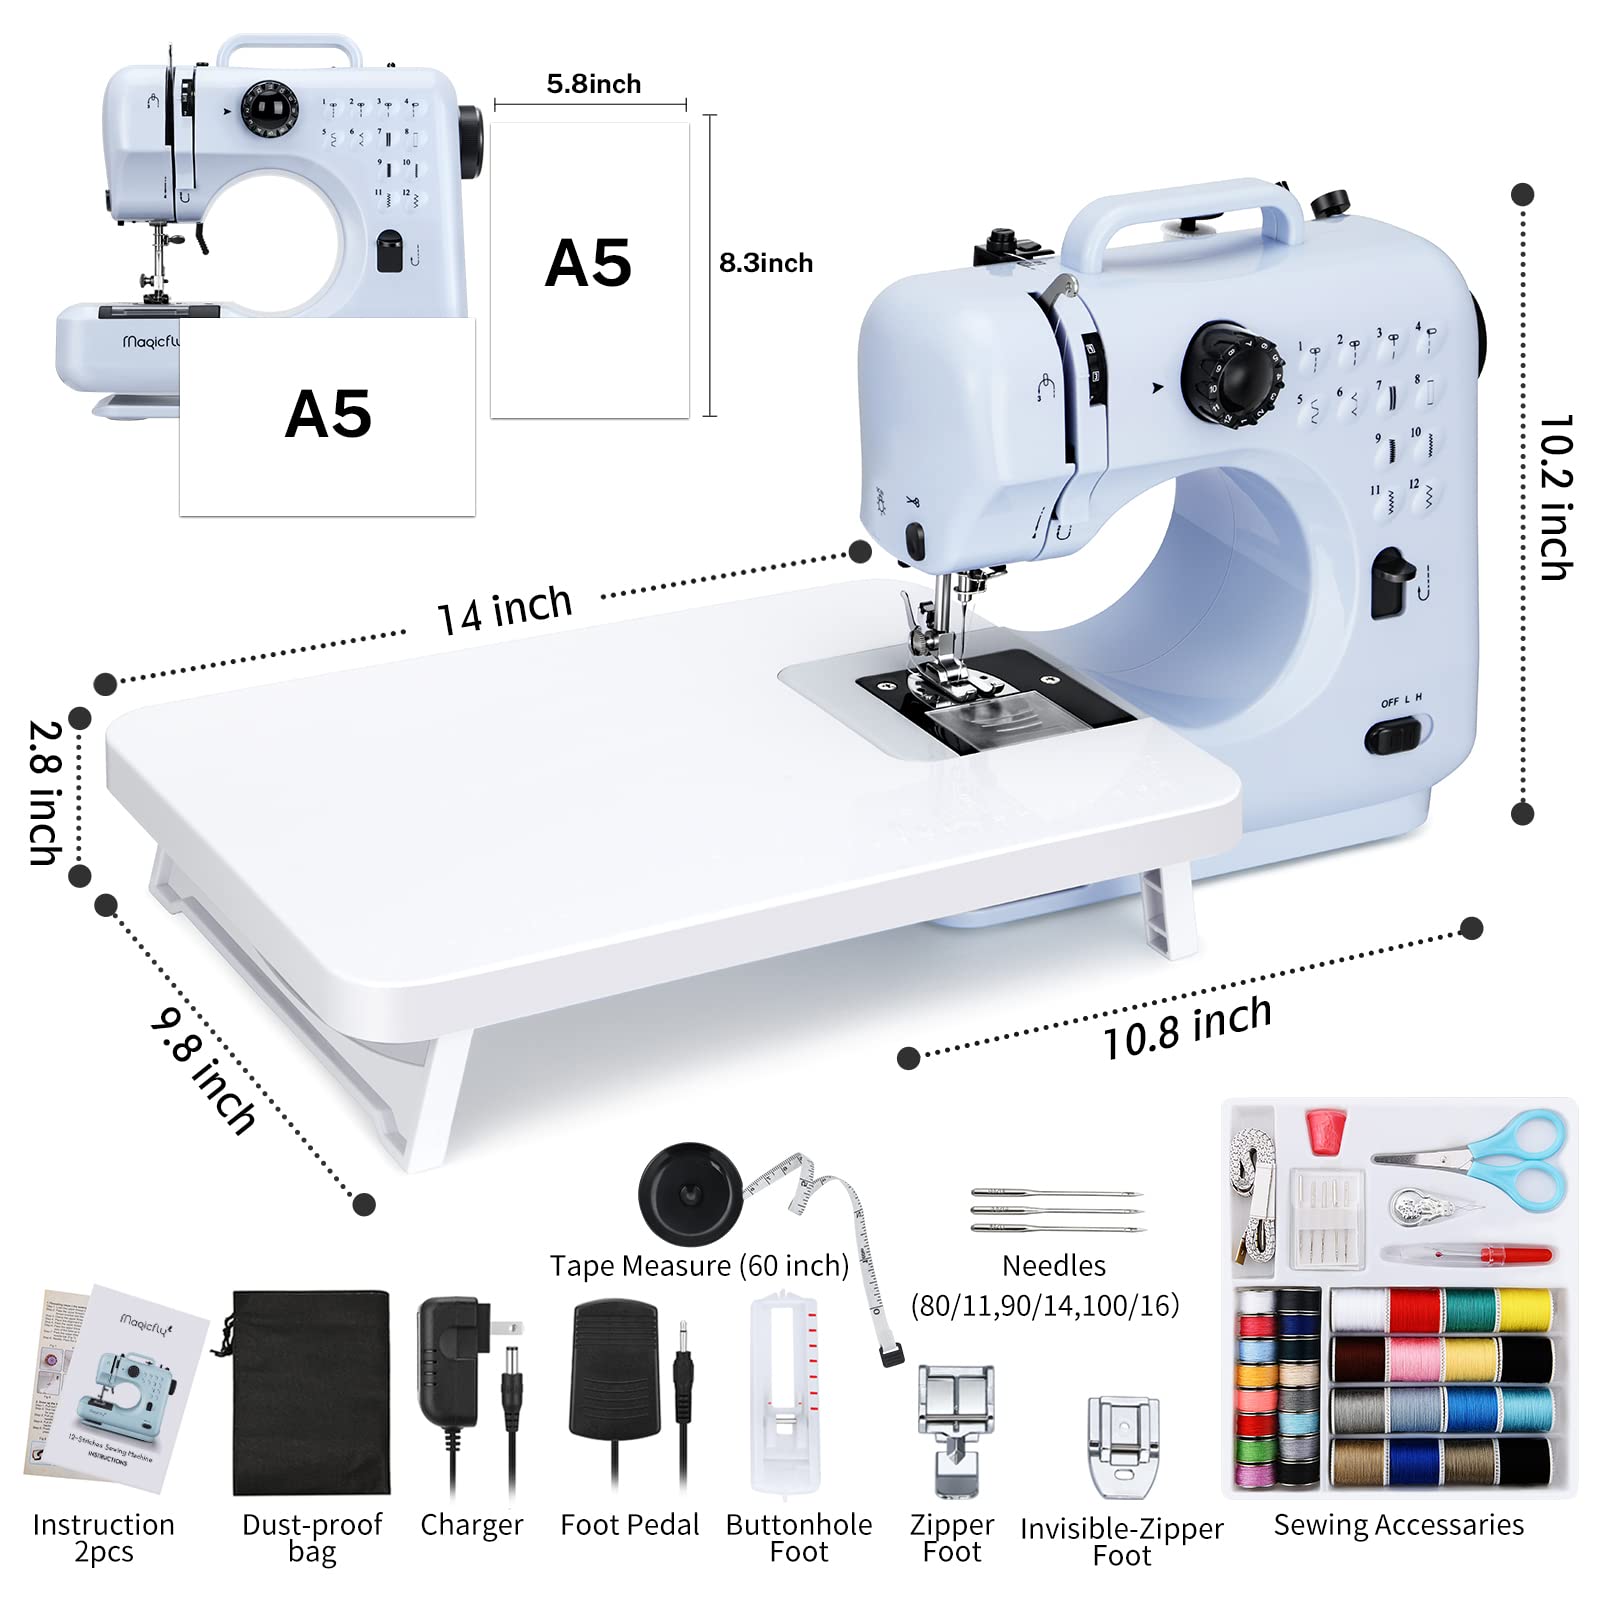 Magicfly Mini Sewing Machine for Beginner - Dual Speed, Portable, Small